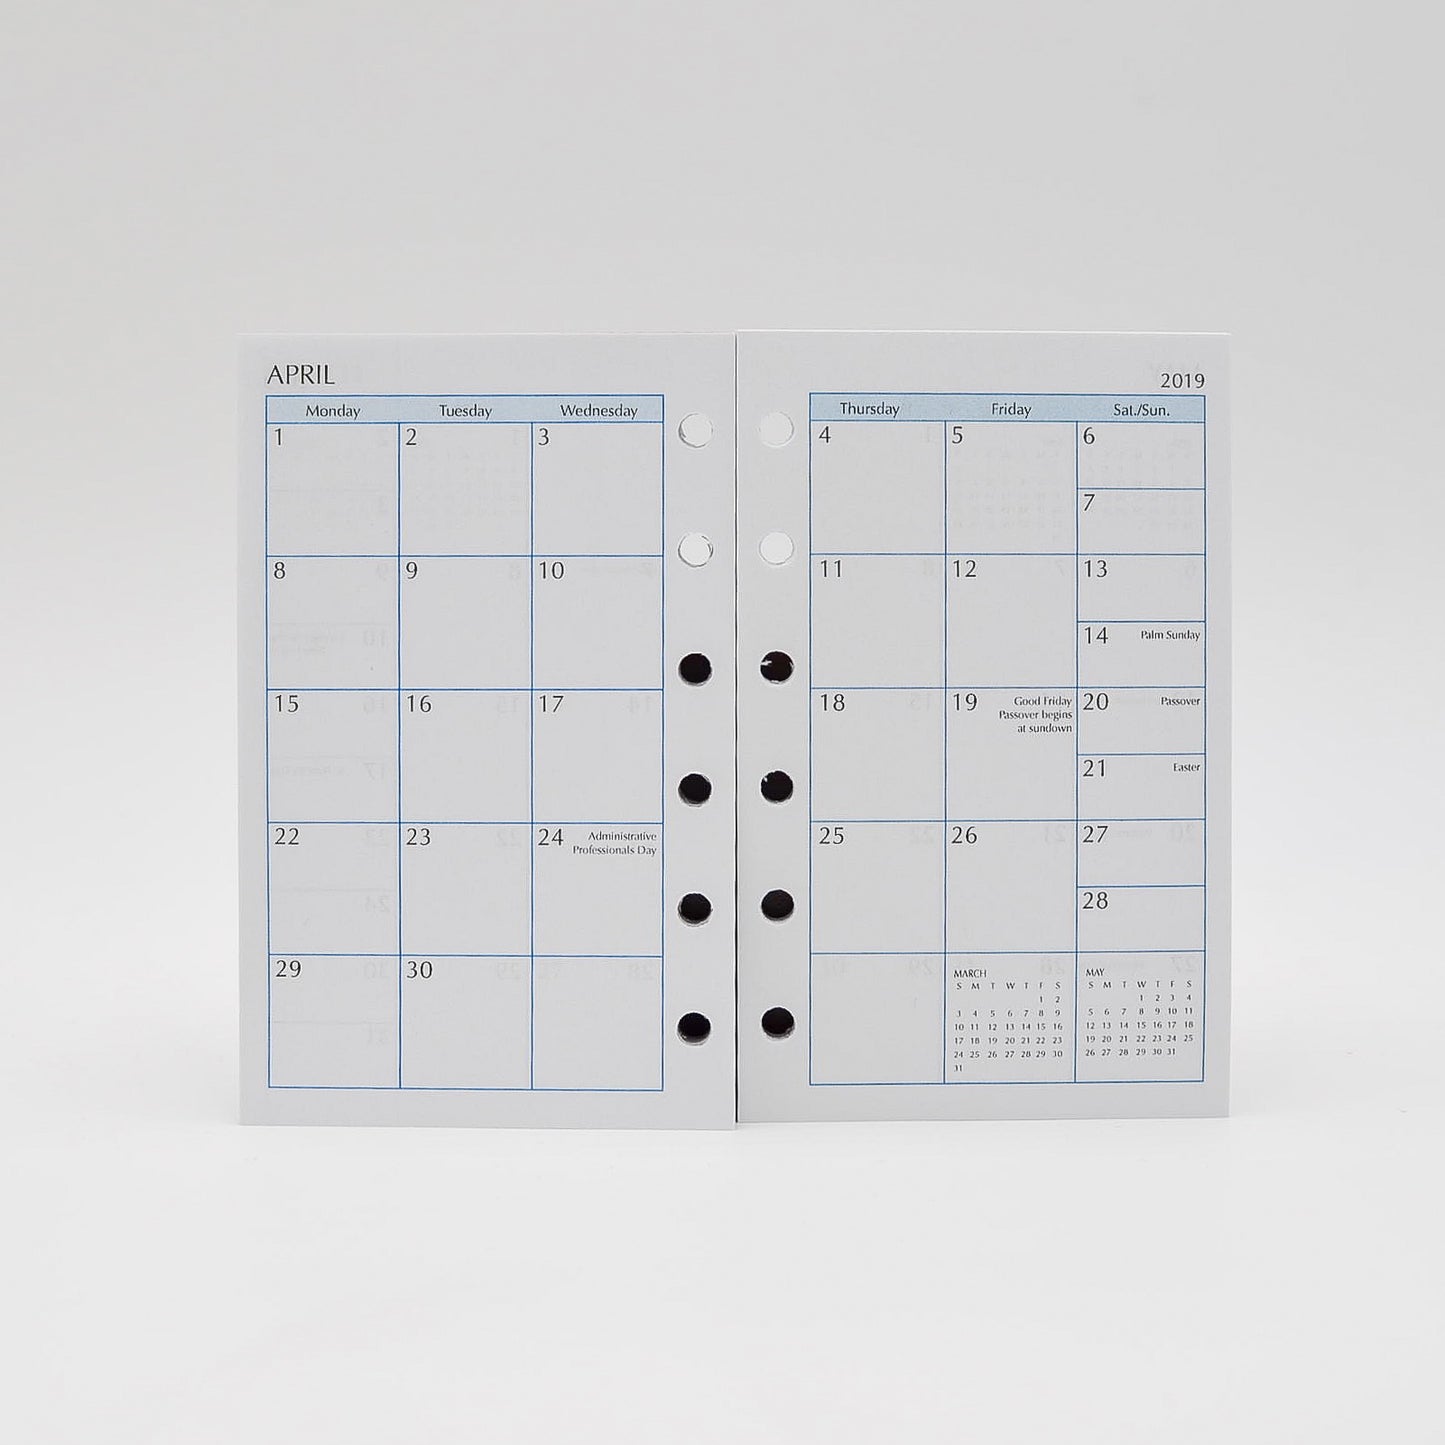 2022 2021 planner McCarthy Collection: MP35P6 5" X 3-1/8" 6-Ring Planner Coach loose leaf calendar refill planner paper 6 hole mccarthy monthly weekly 2019 2020 raika scully preference louis viutton loose leaf paper insert david king planning diary 6 hole 